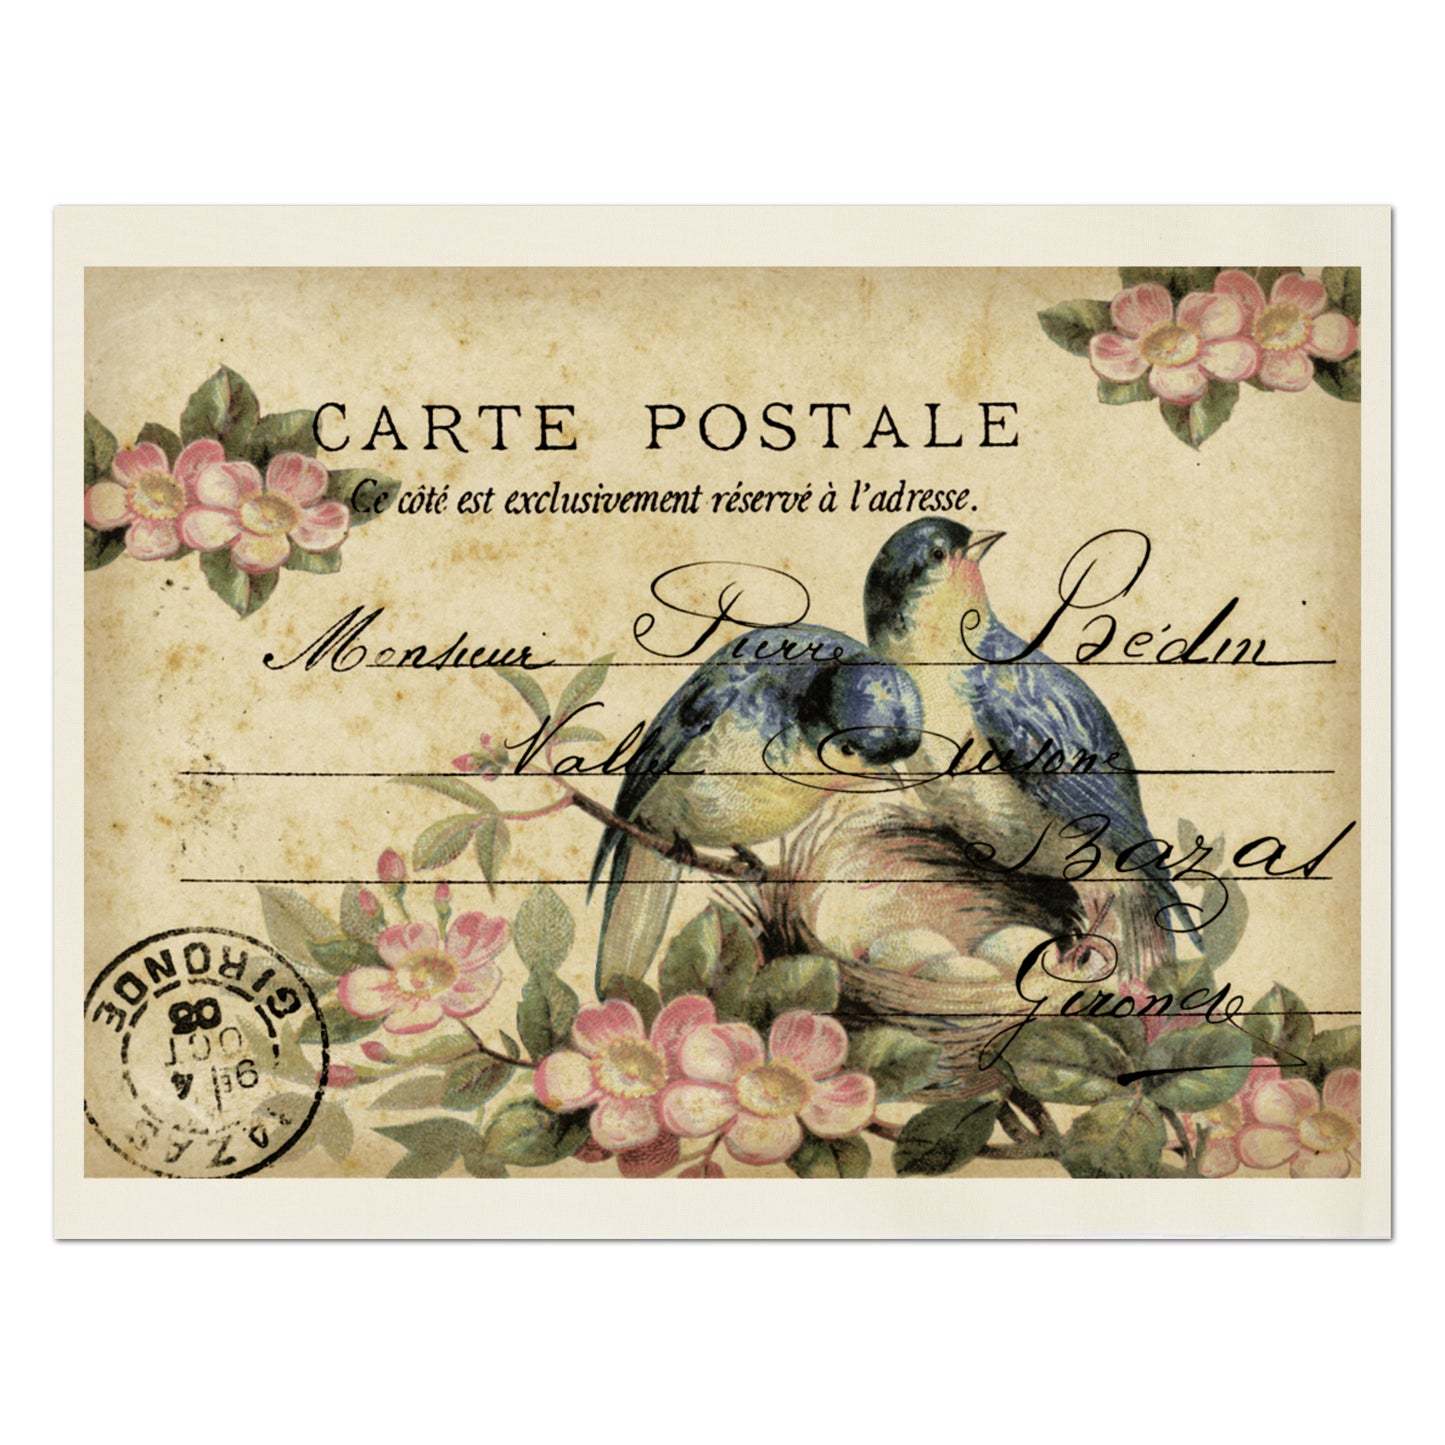 Antique French Fabric, Blue Bird, Shabby Chic Fabric, Vintage, Post Card